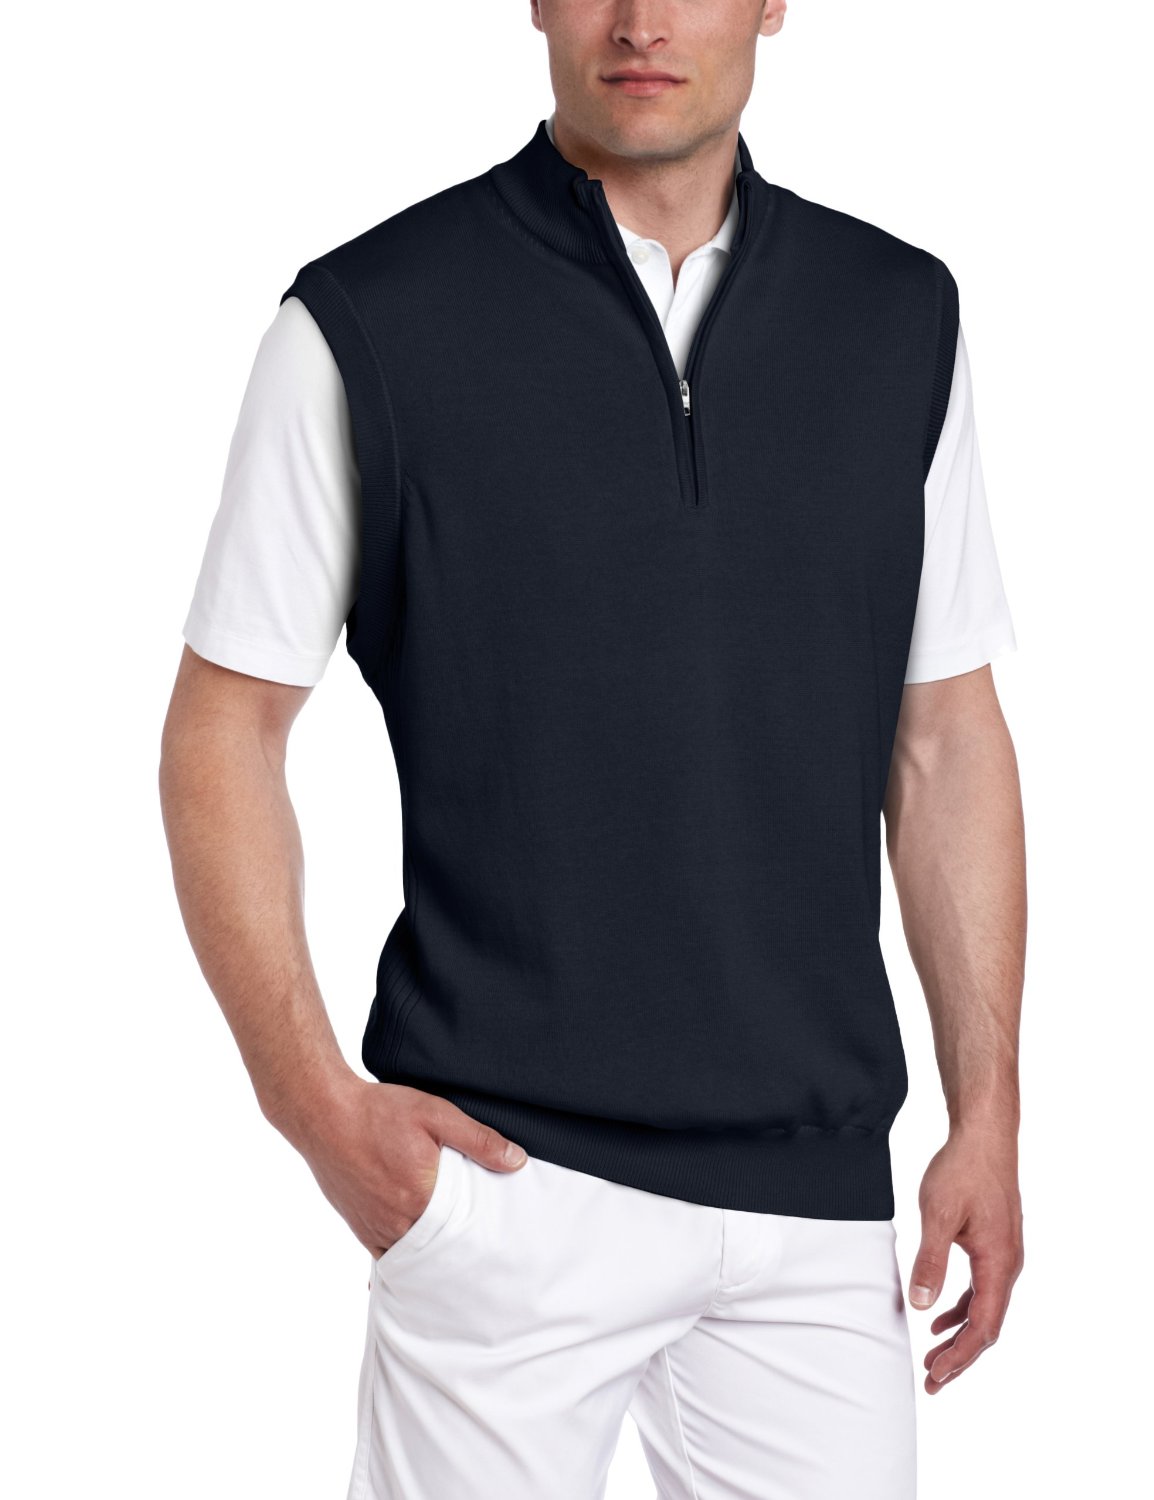 Mens Collection Lined Pima Golf Vests